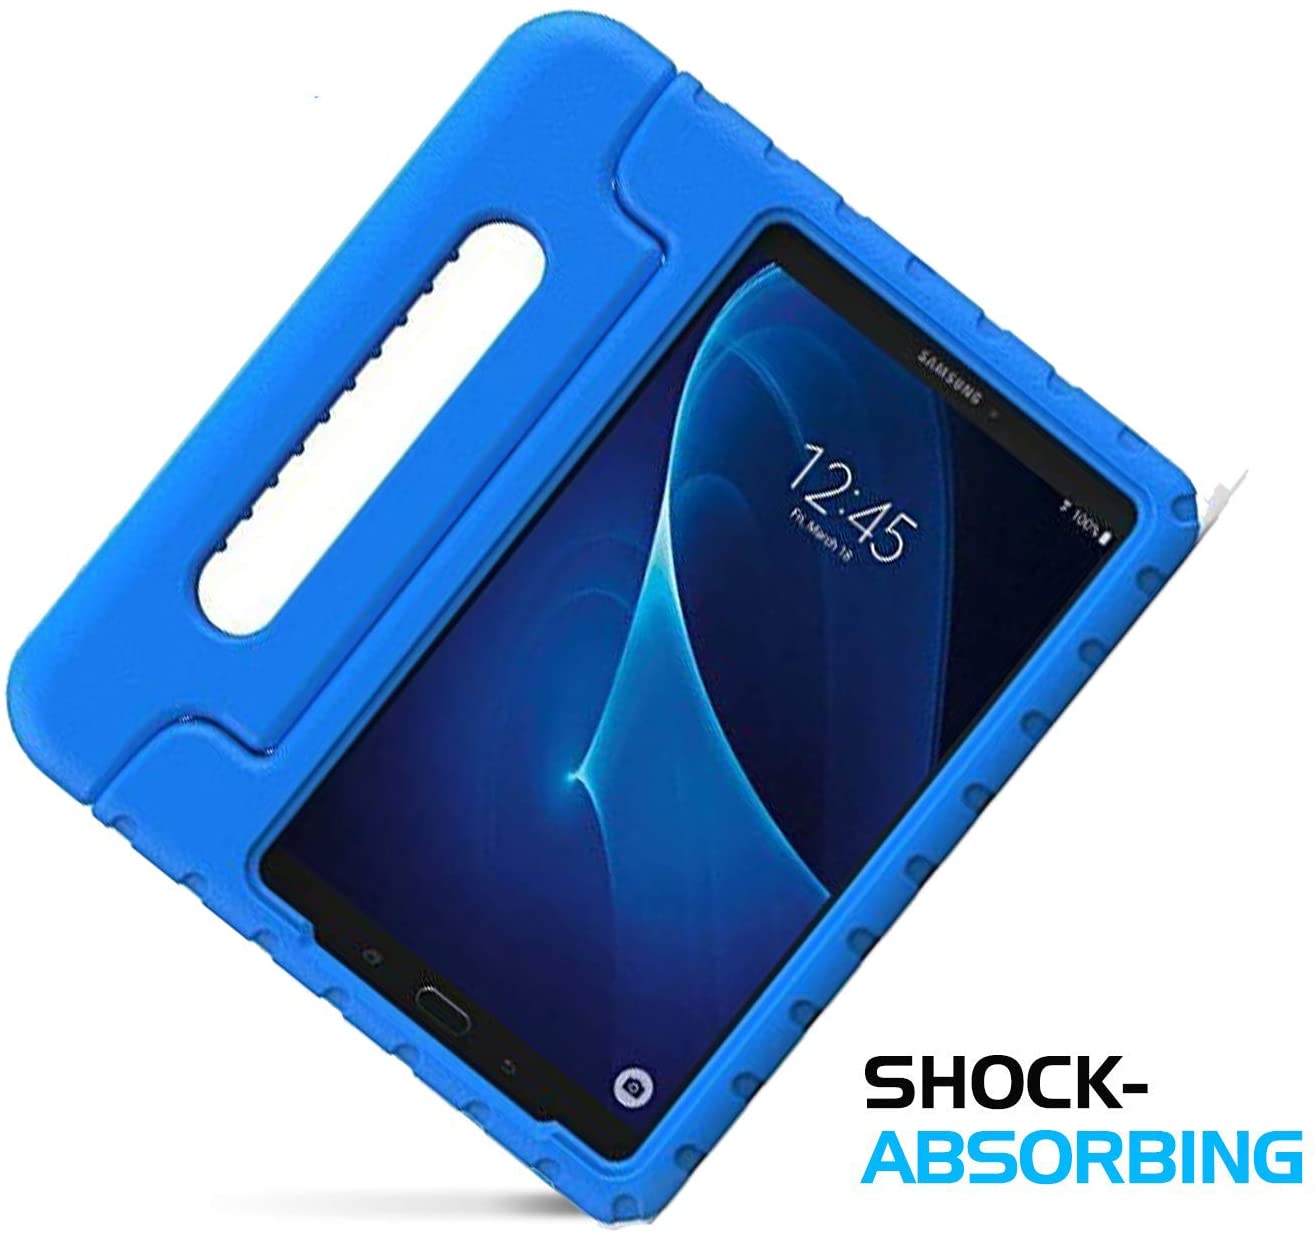 MOKO Kids Case for Samsung Galaxy Tab A 7.0 2017 Shockproof Light Weight A 7-inch Tablet - Blue - e4cents